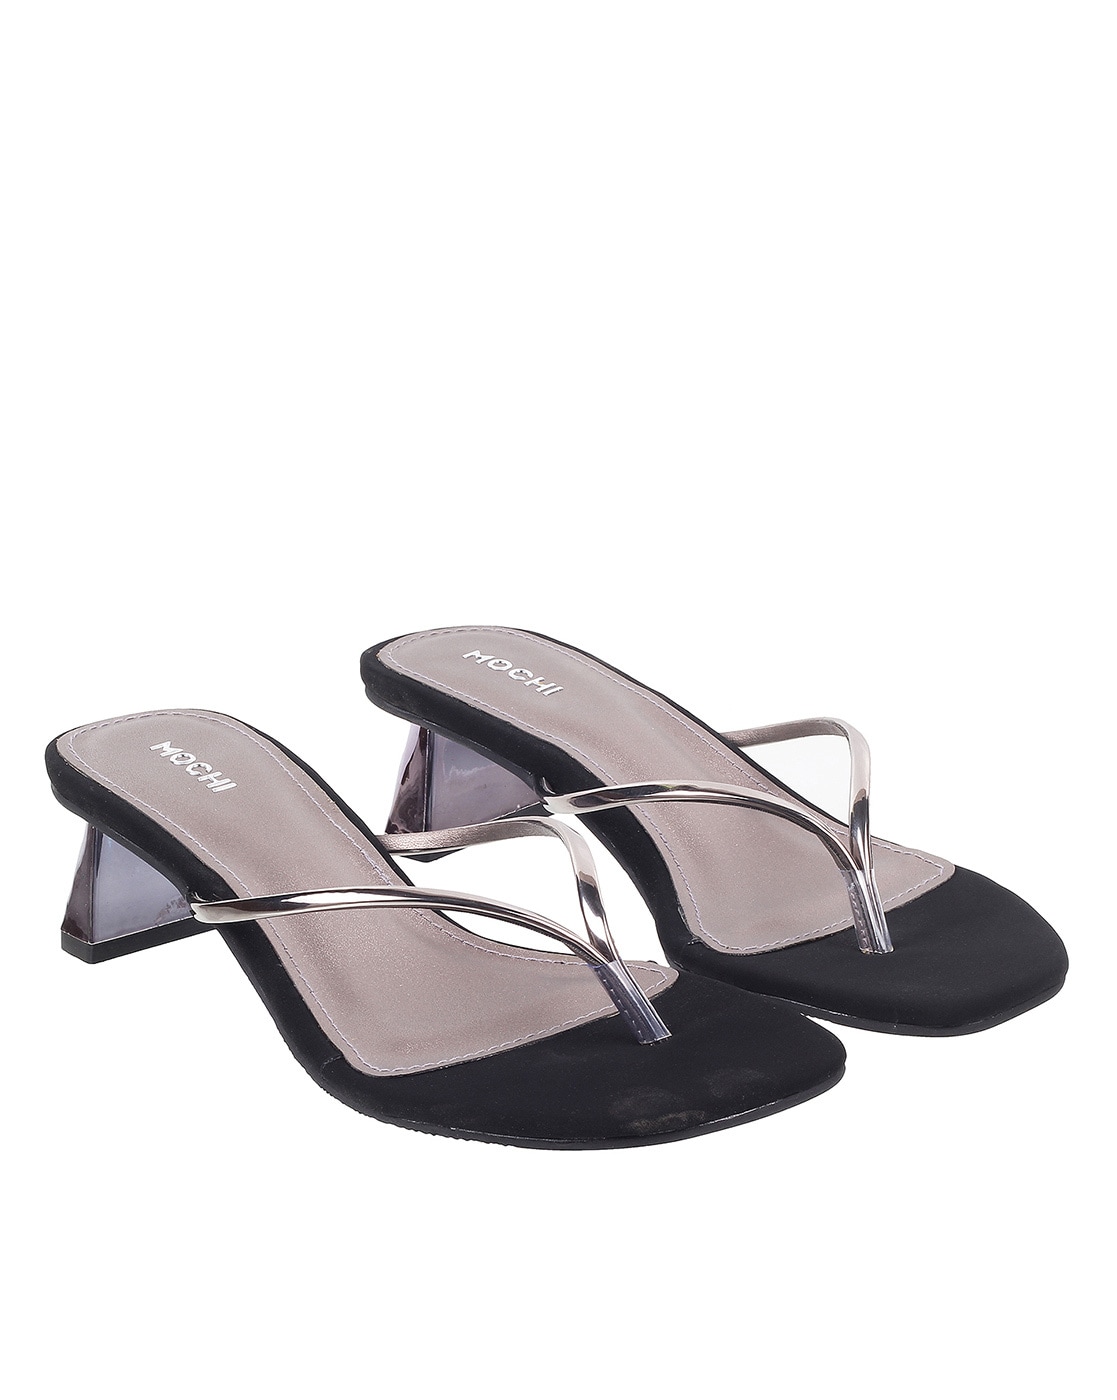 Mochi Cream Wedges Heels - Buy Mochi Cream Wedges Heels Online at Best  Prices in India on Snapdeal